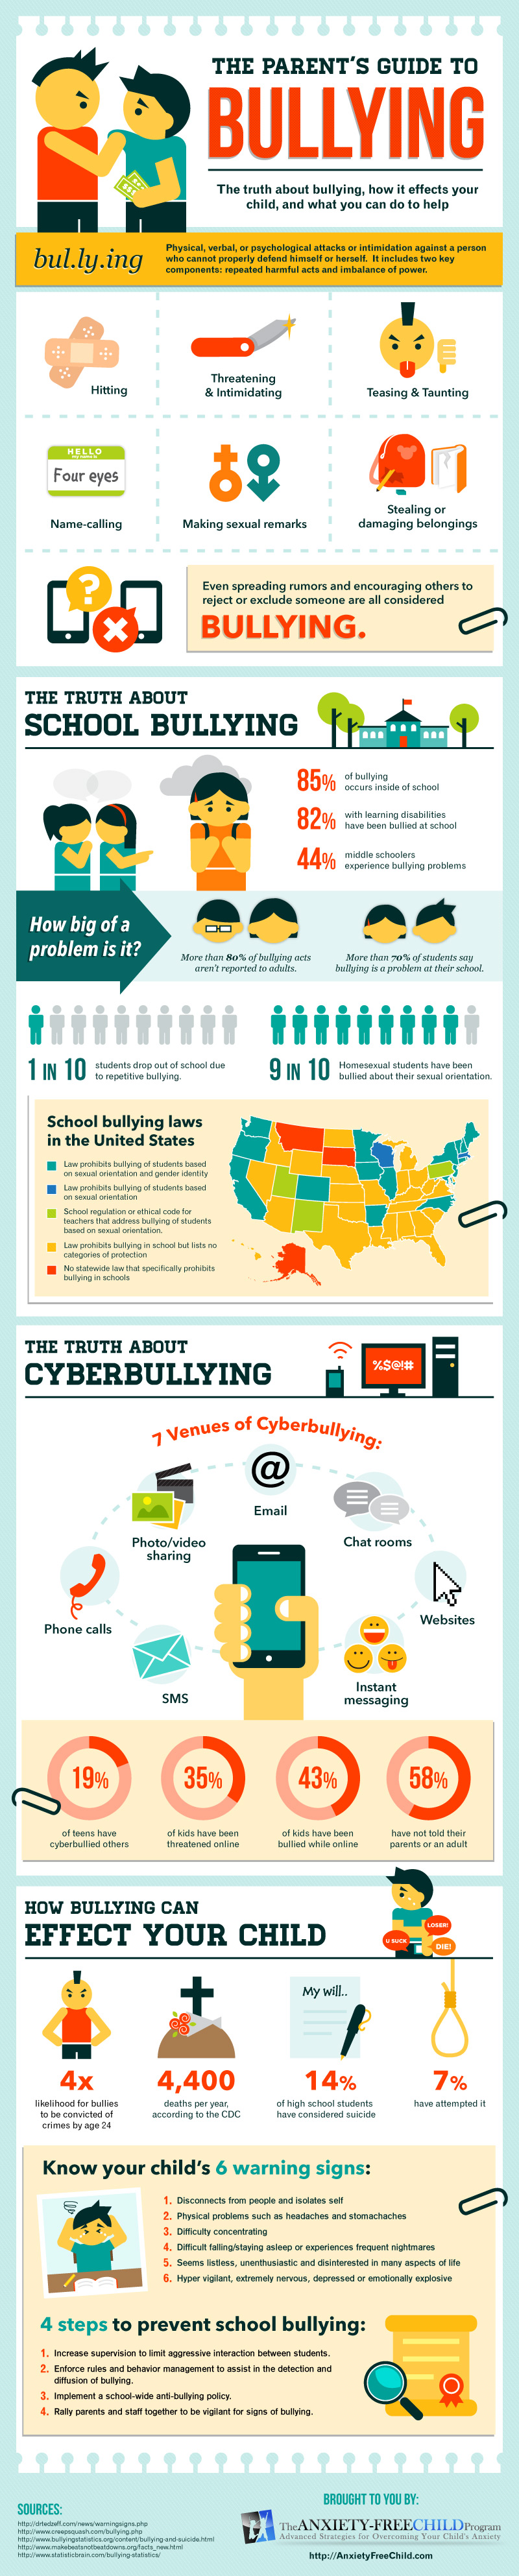 Teen Bullying and Cyberbulling Guide